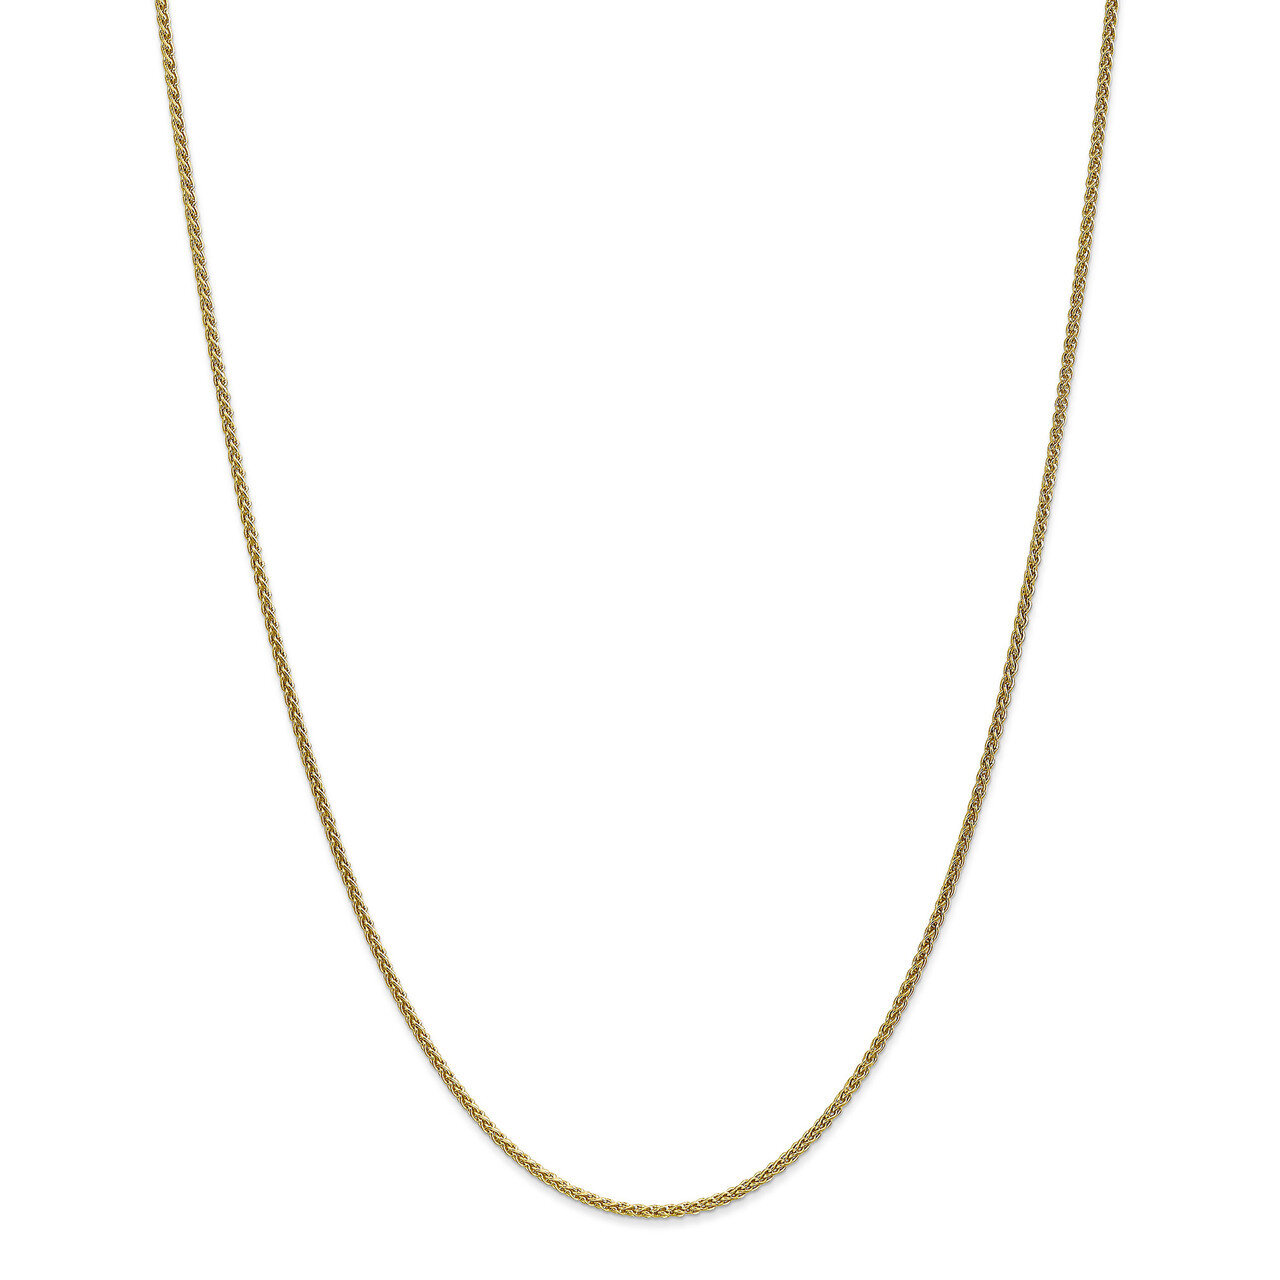 24 Inch 1.65mm Solid Polished Spiga Chain 10k Gold 10SPG040-24